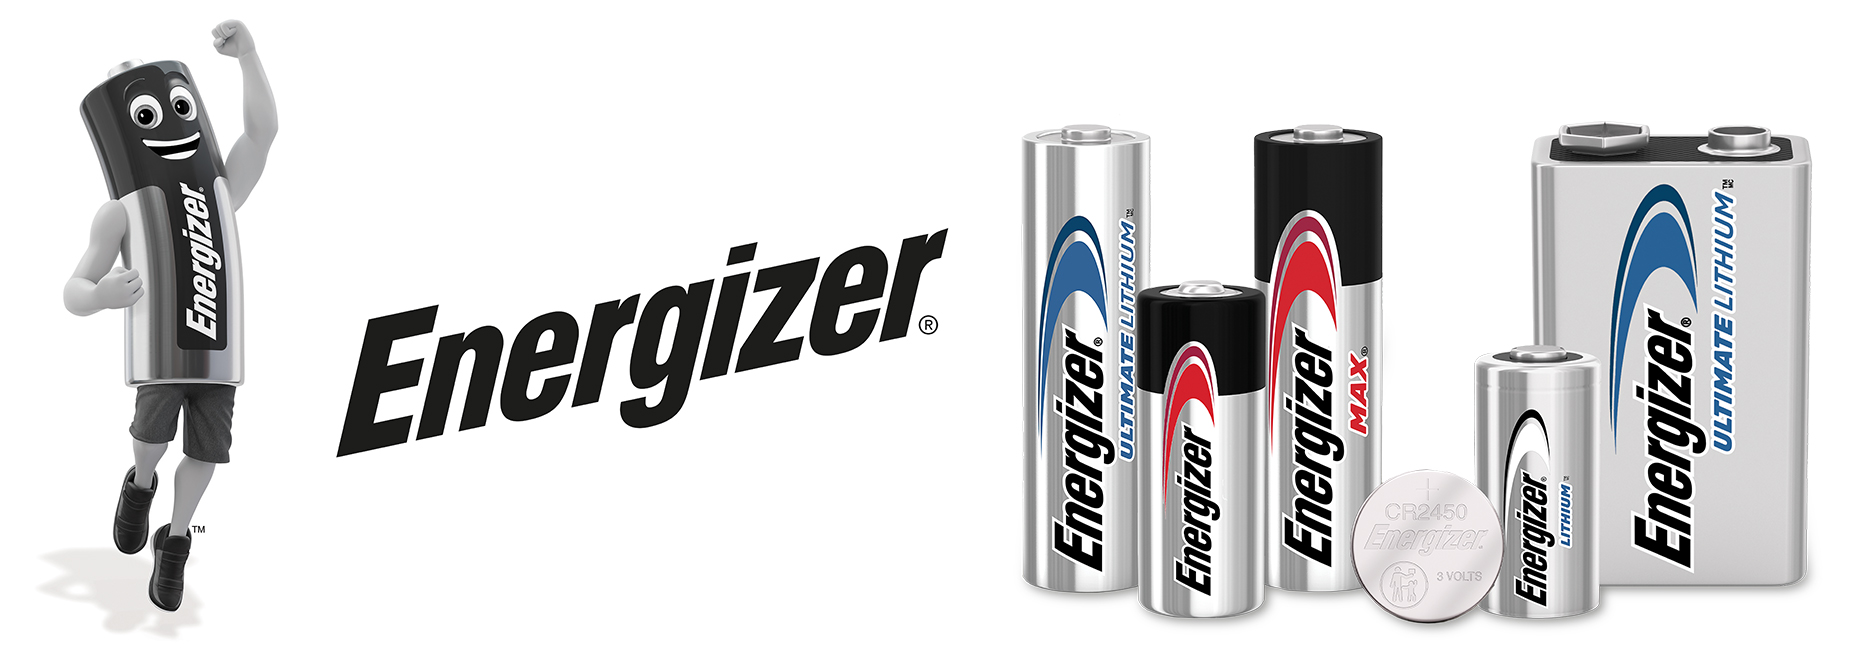 energizer battery banner with logo